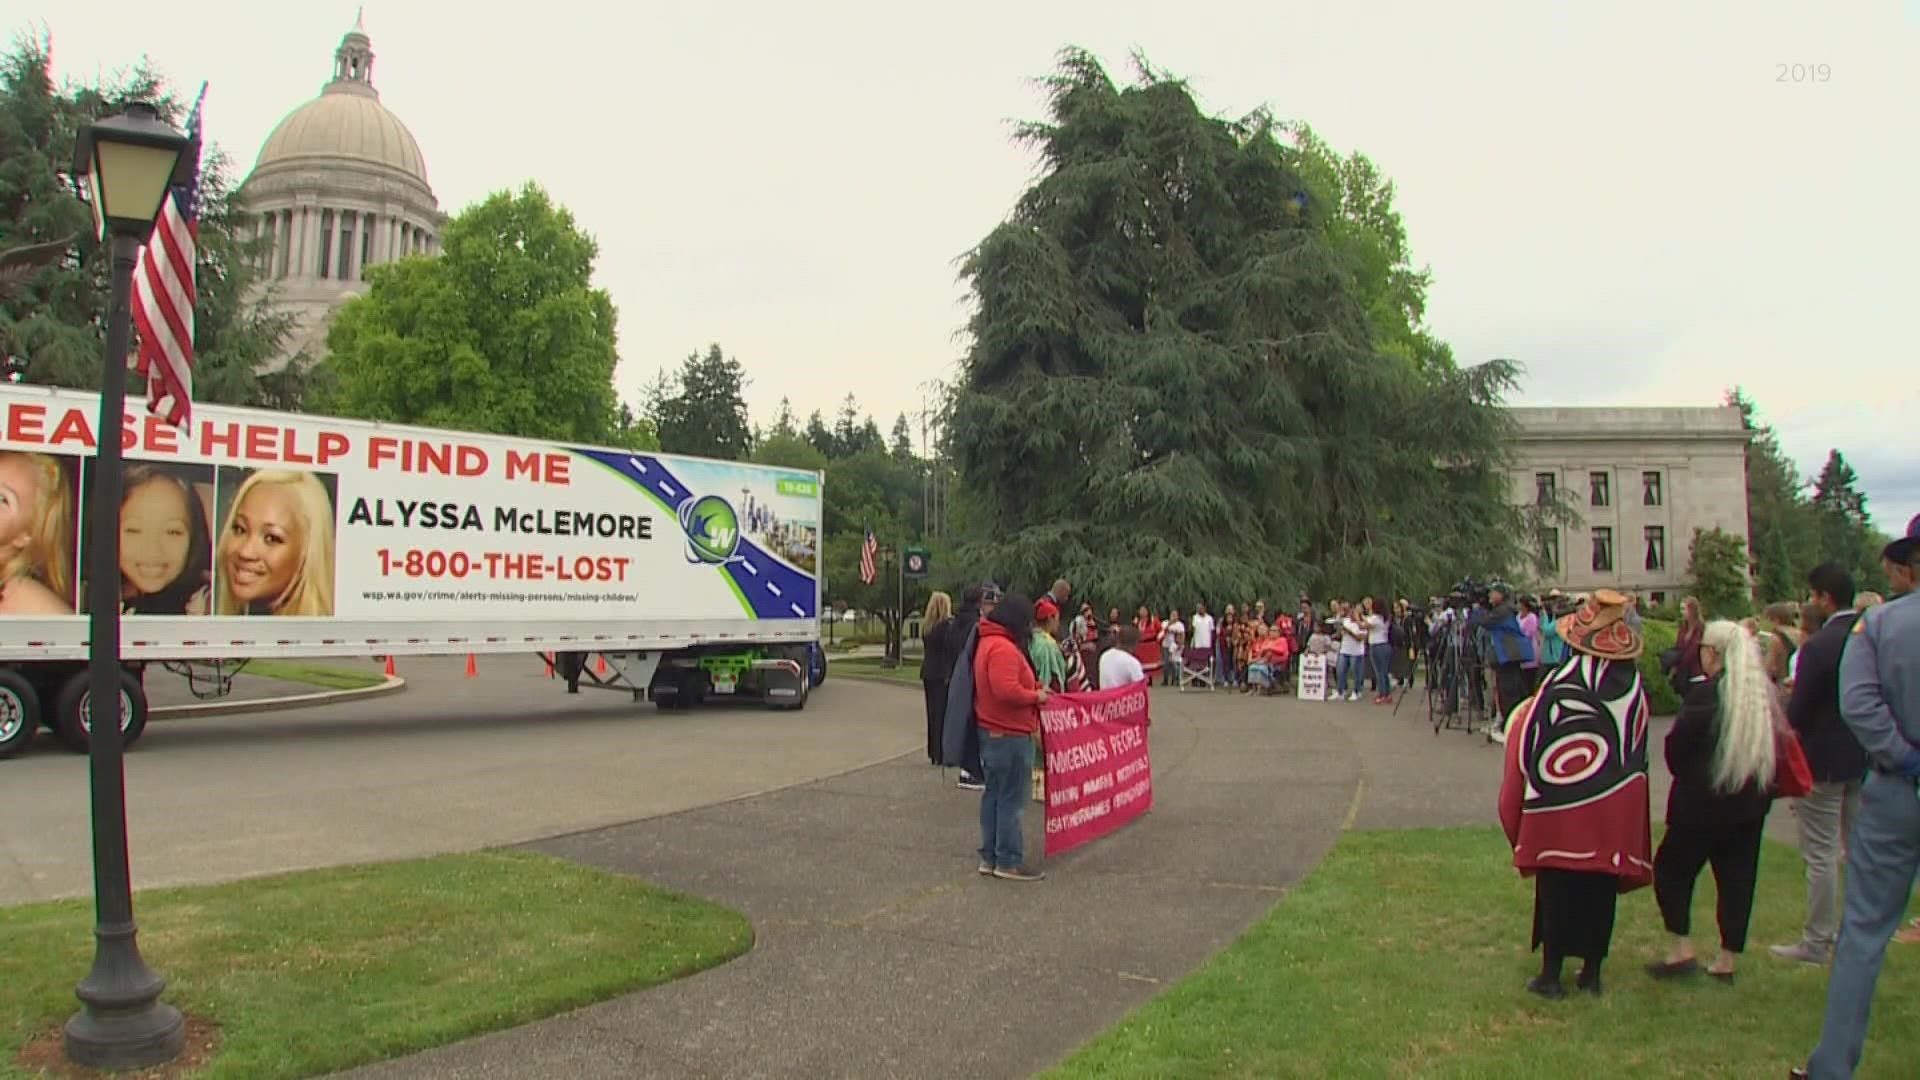 The Urban Indian Health Institute named both Seattle and Tacoma as cities with the highest cases of missing or murdered Indigenous women and girls.